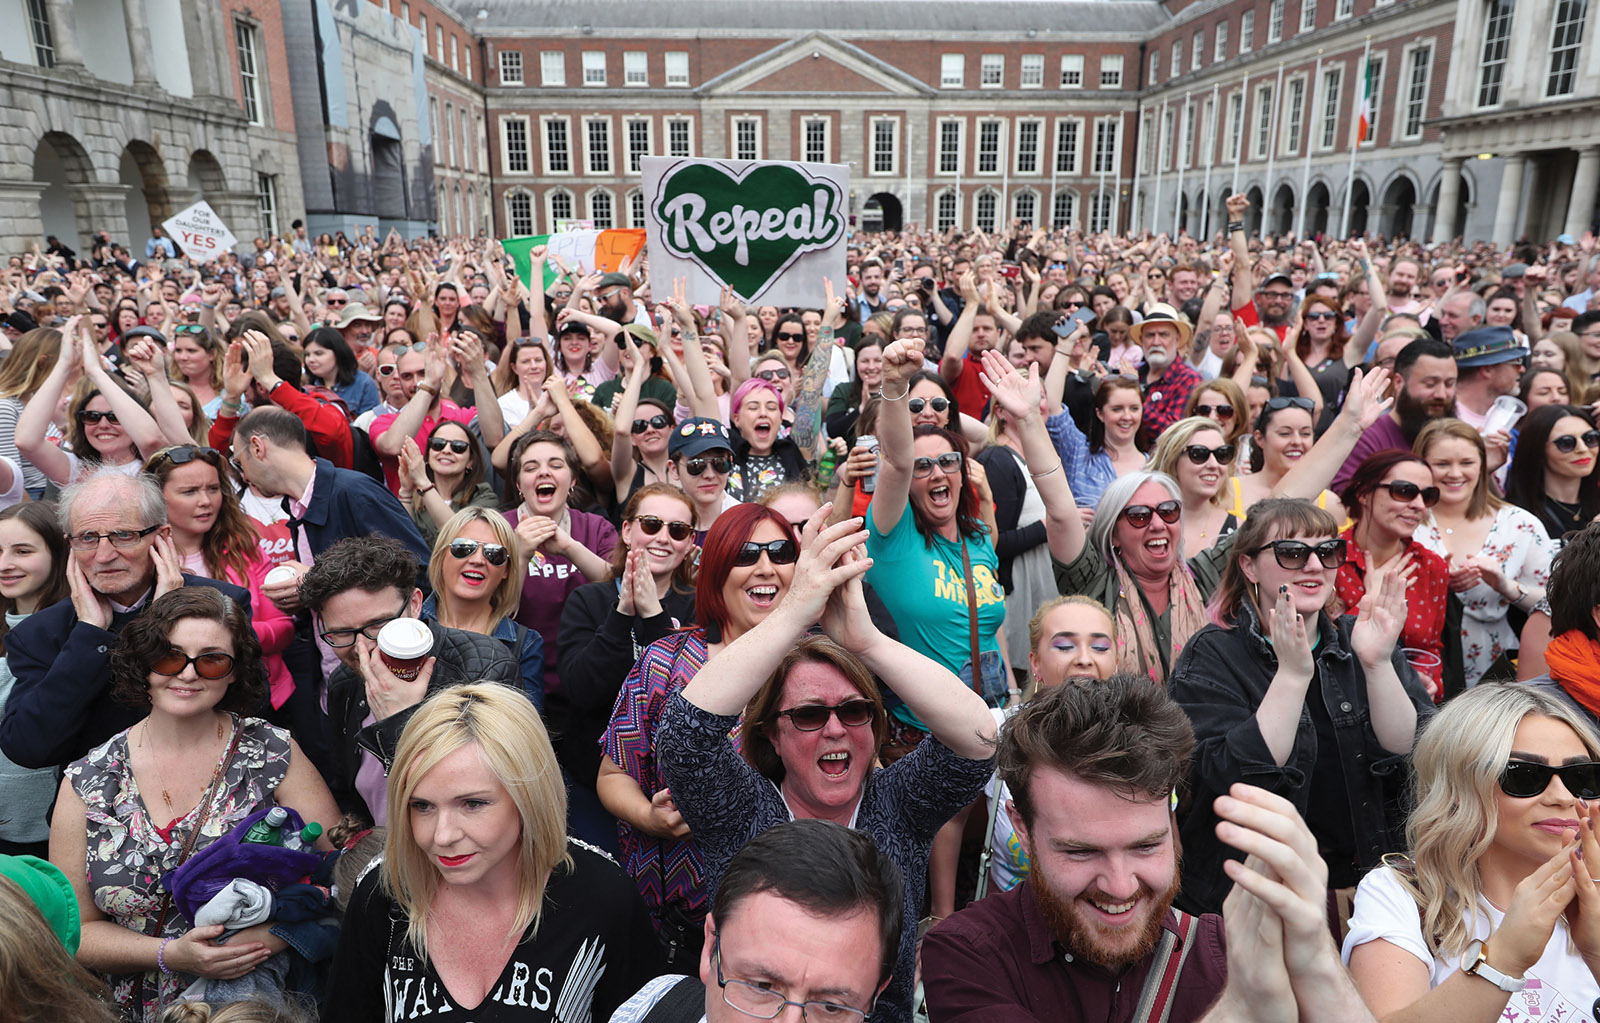 A crowd celebrating the repeal of Ireland's ban on abortion, Dublin